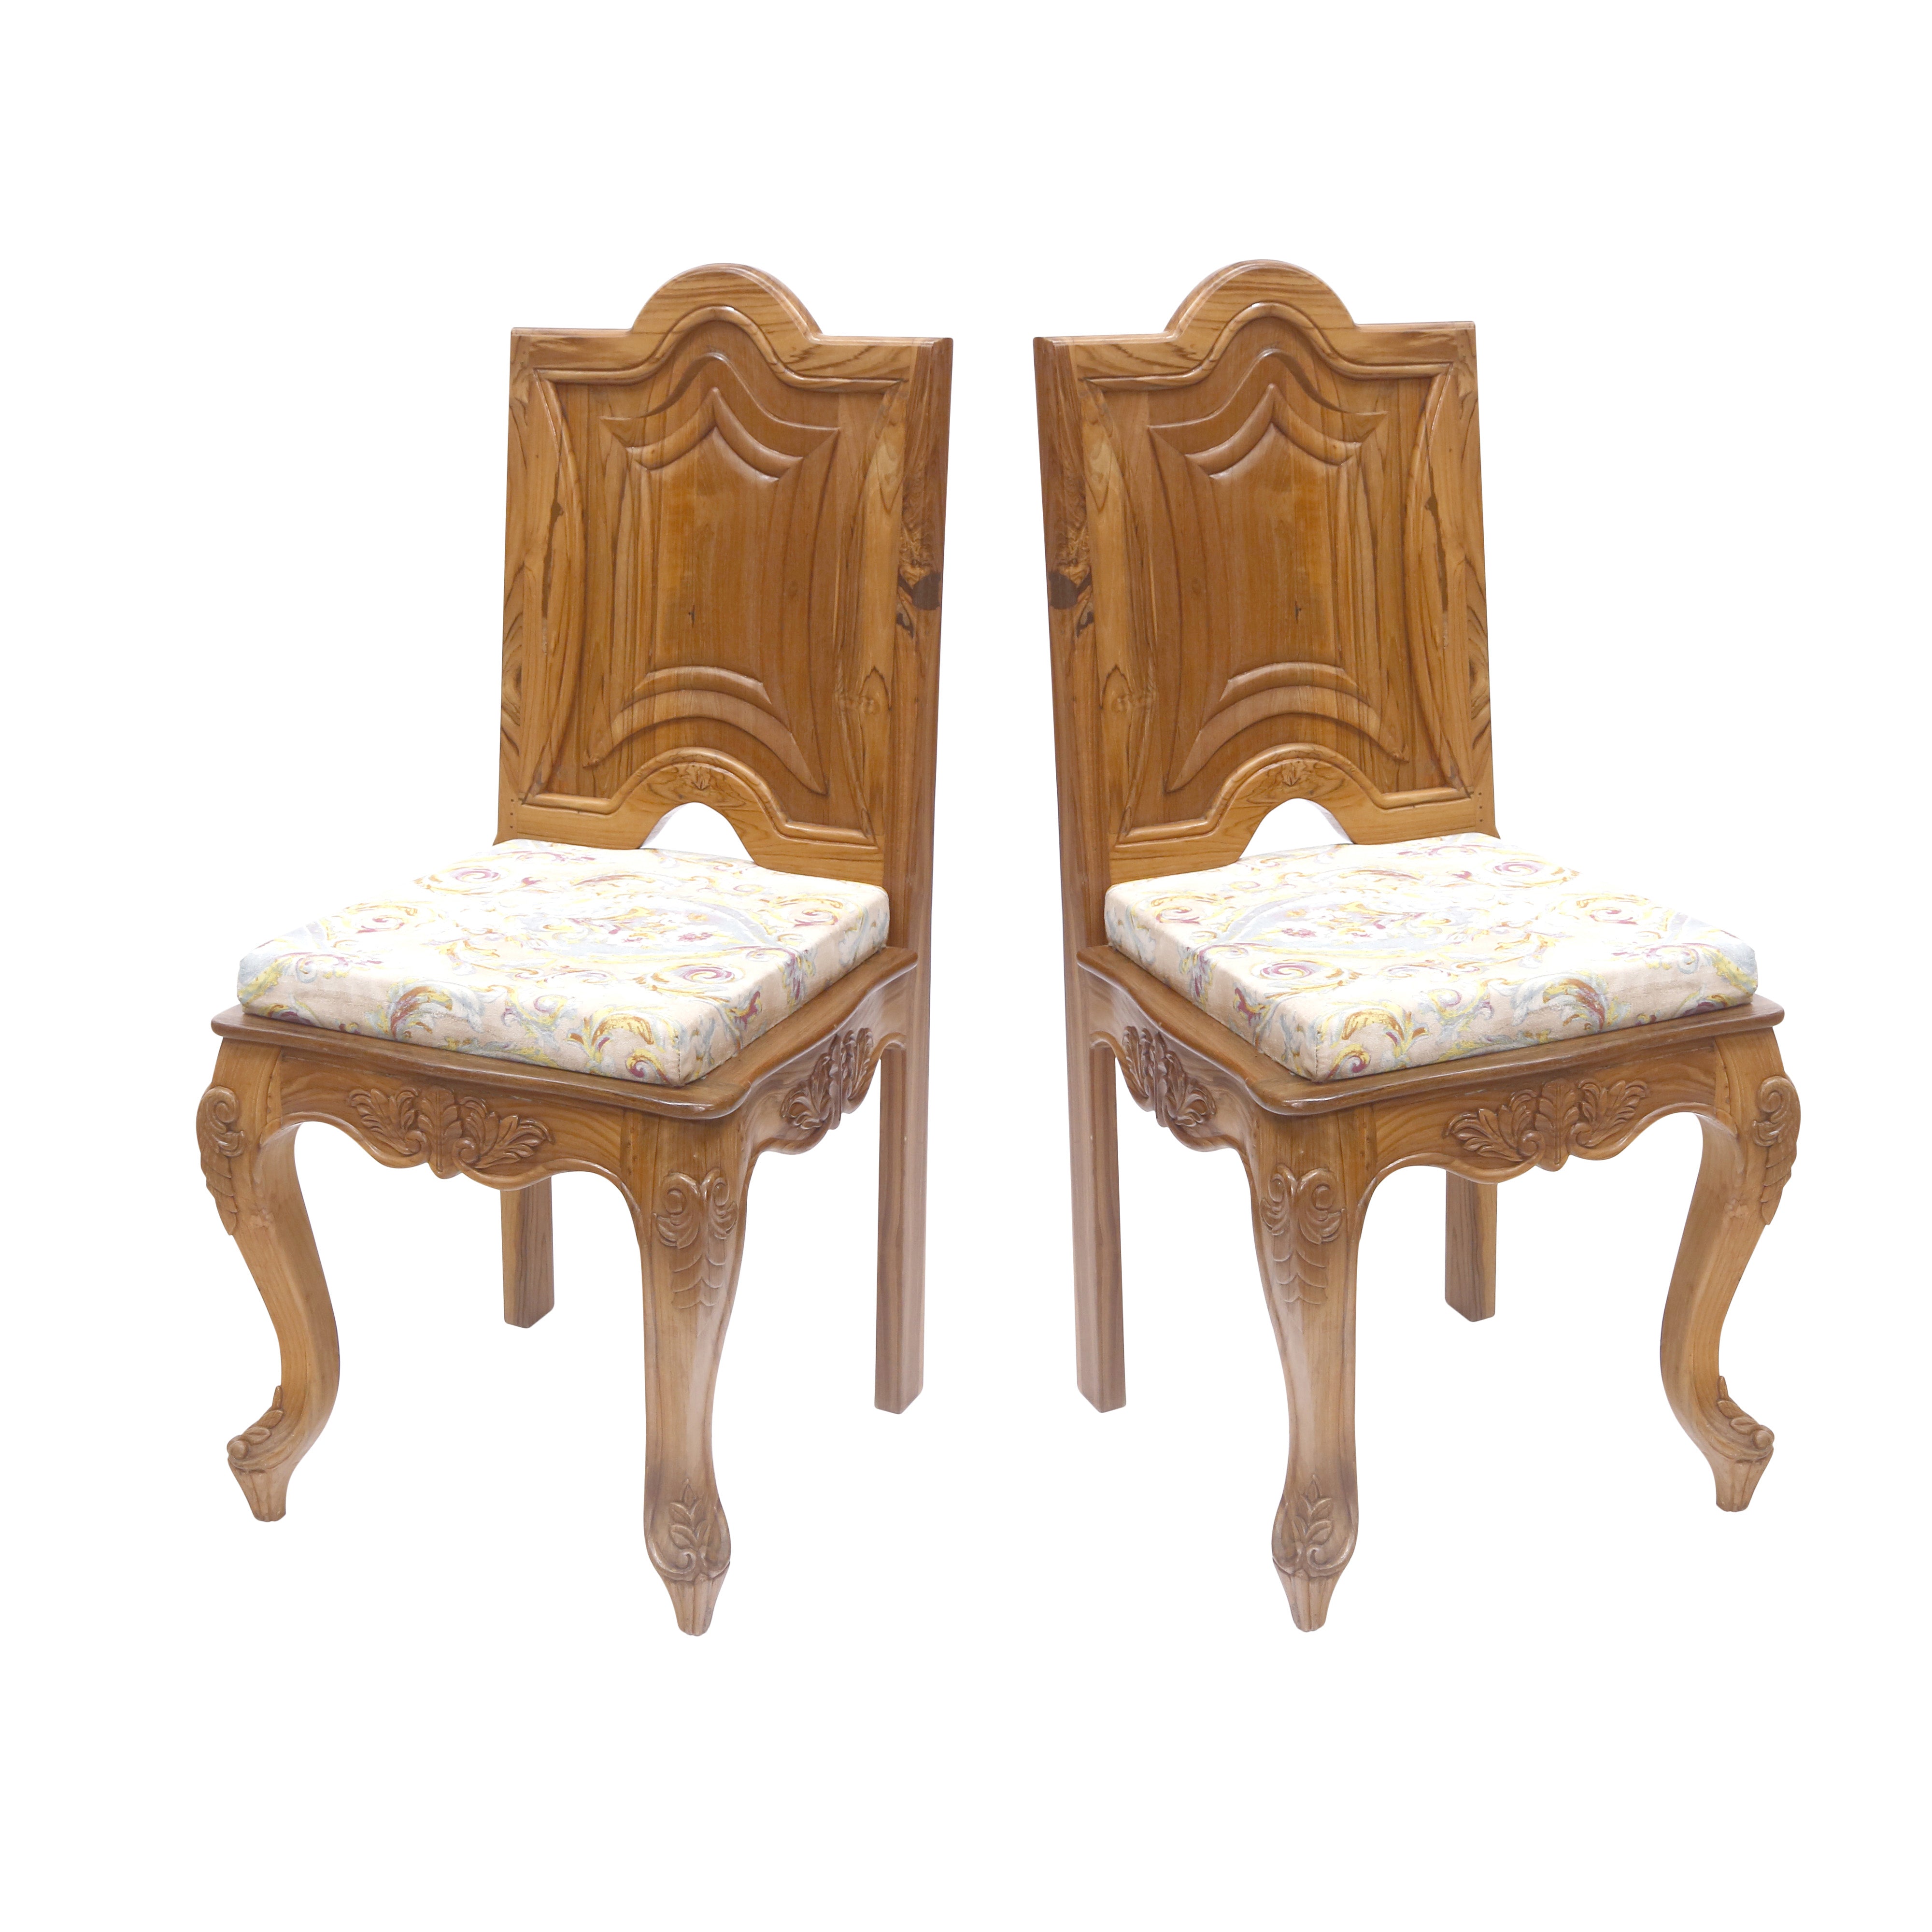 (Set of 2) Wood Ornate Dinning Chair Dining Chair